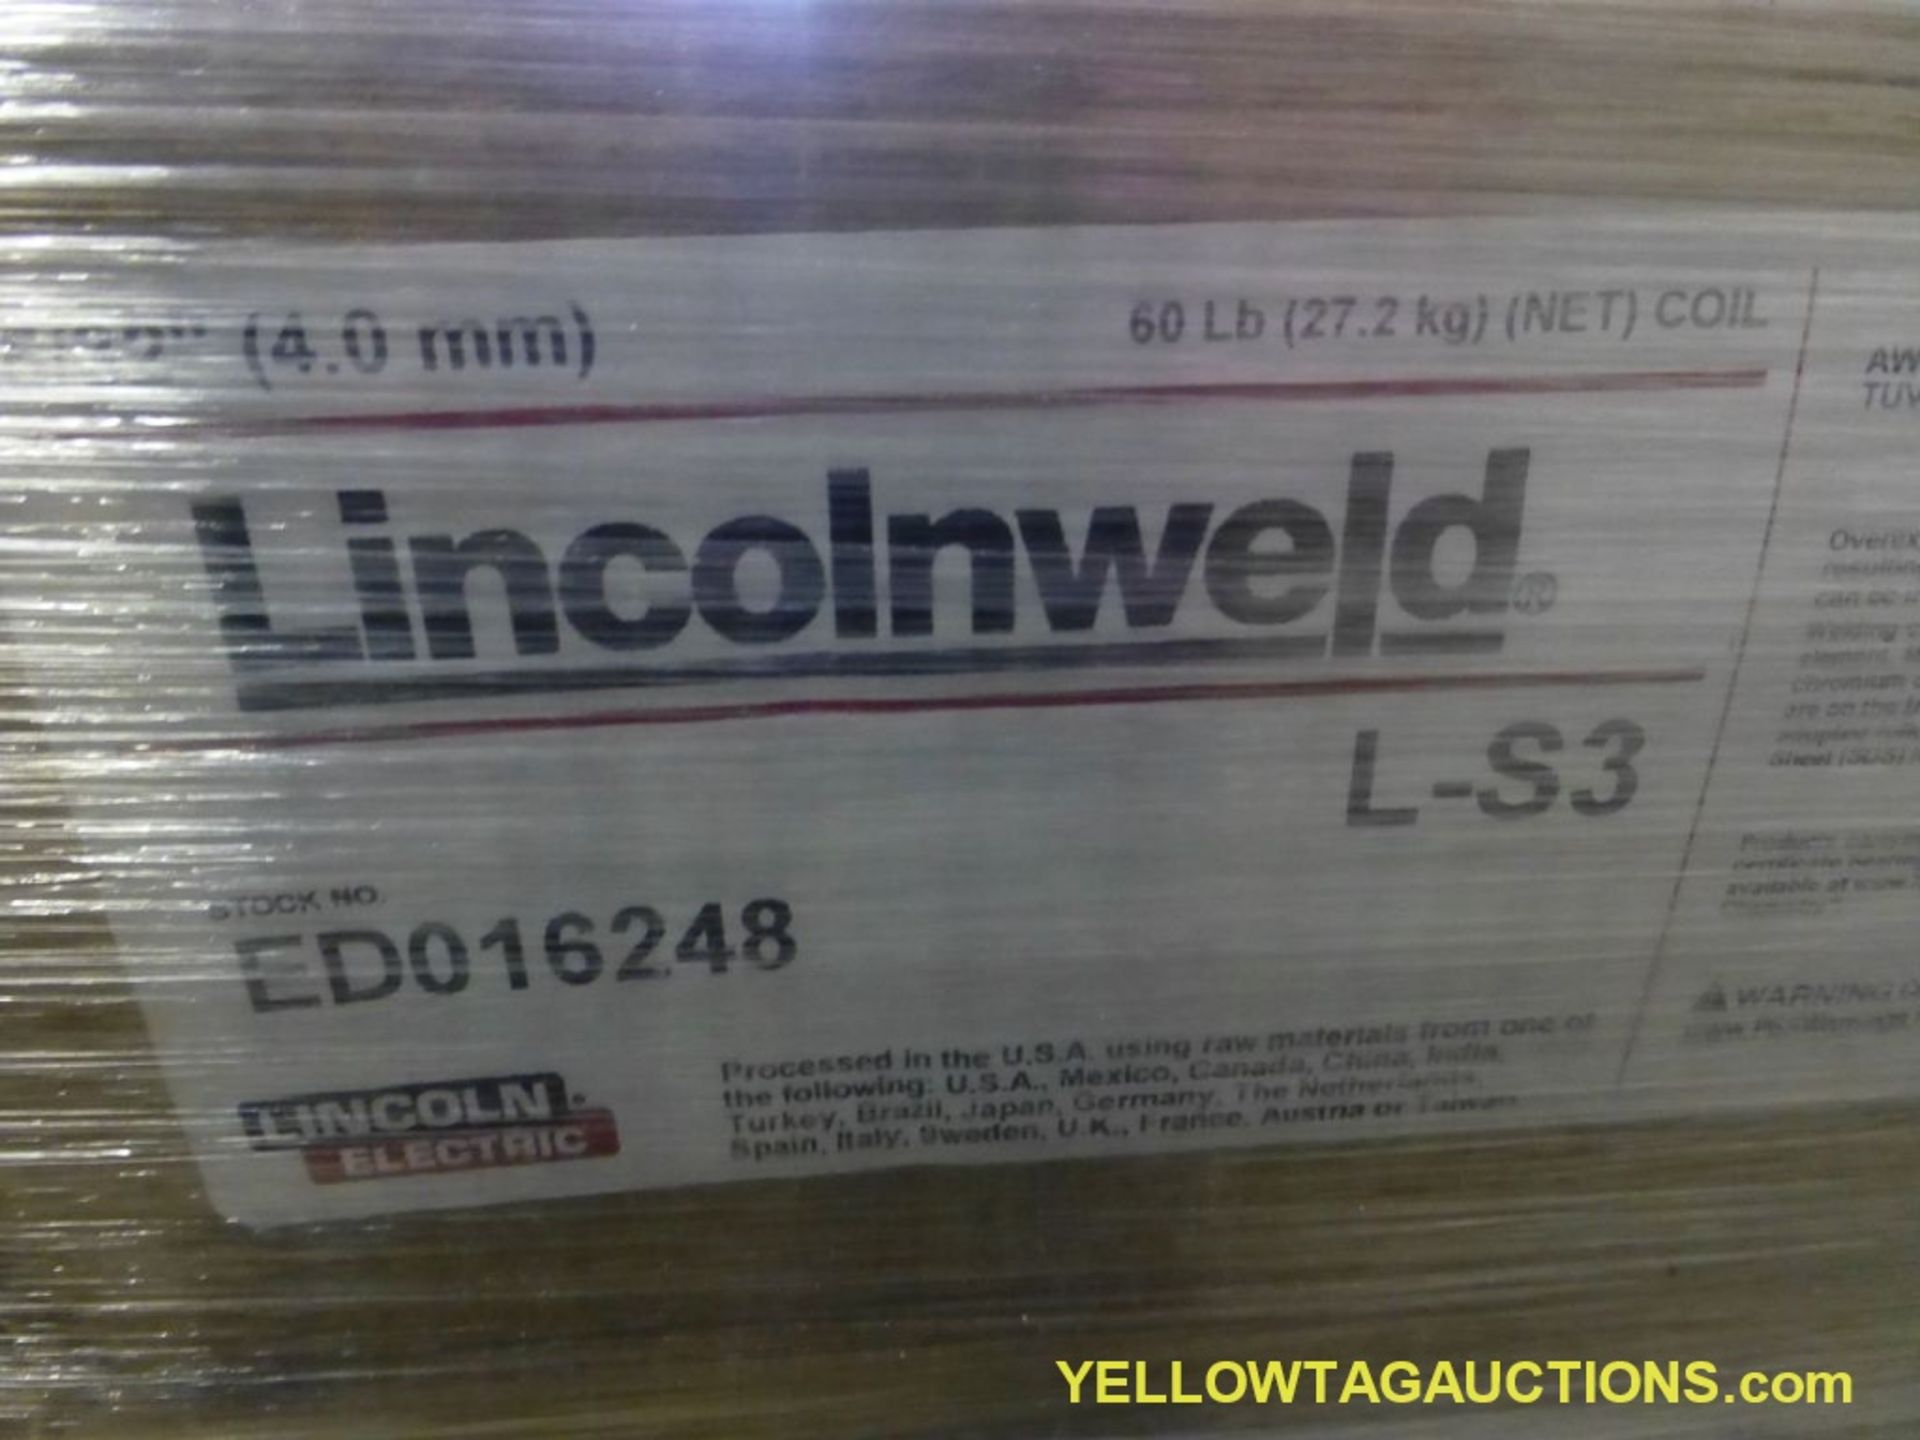 Lot of (54) Boxes of Lincoln Electric Lincolnweld L-S3 Welding Wire | Model No. ED015 248; New Surpl - Image 3 of 5